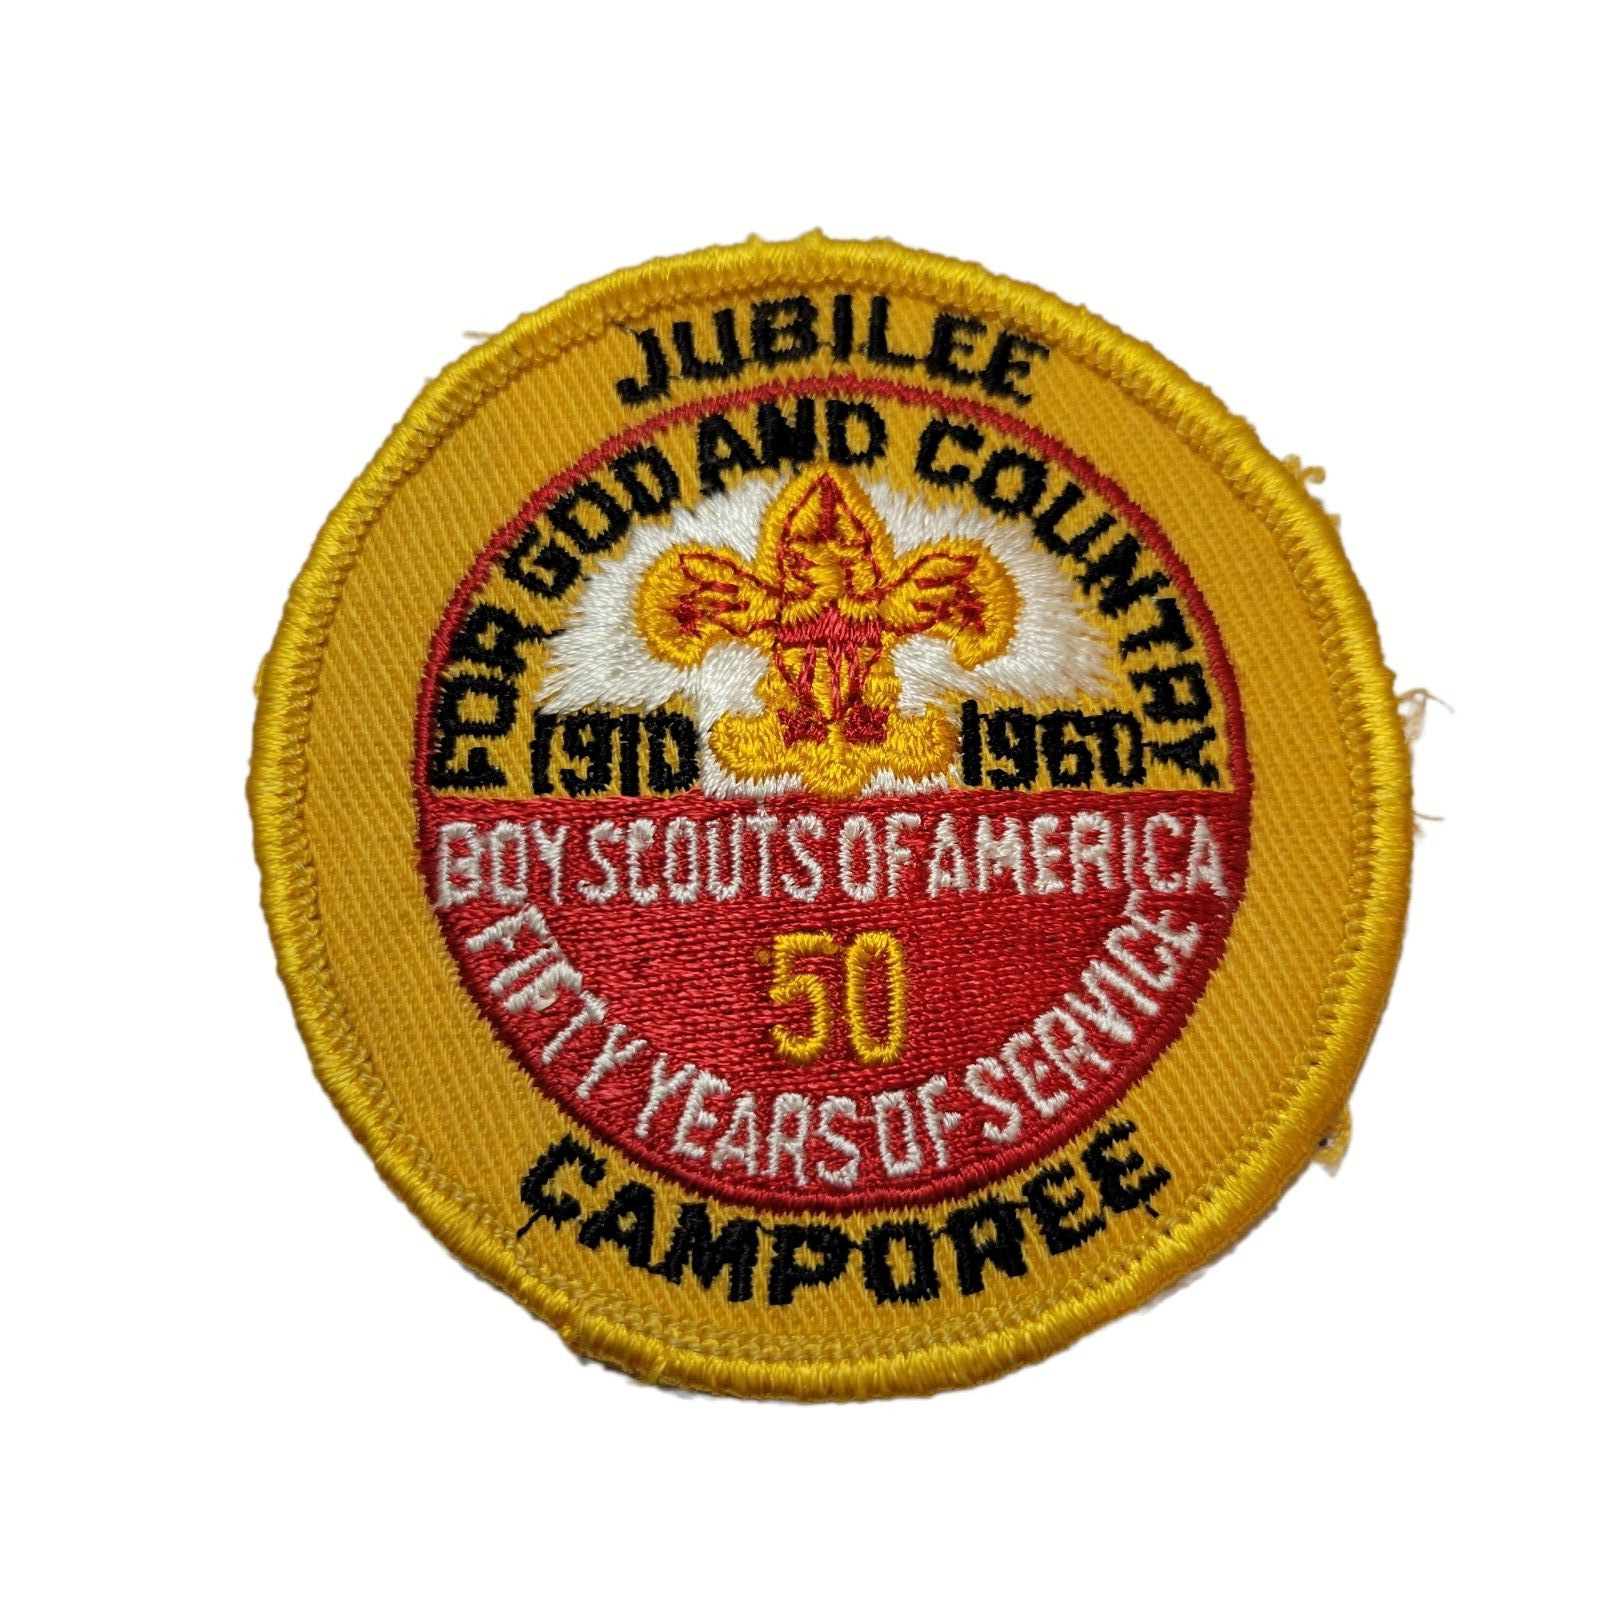 1960 Jubilee Camporee Boy Scouts Patch - 50 Years of Service 1910-1960